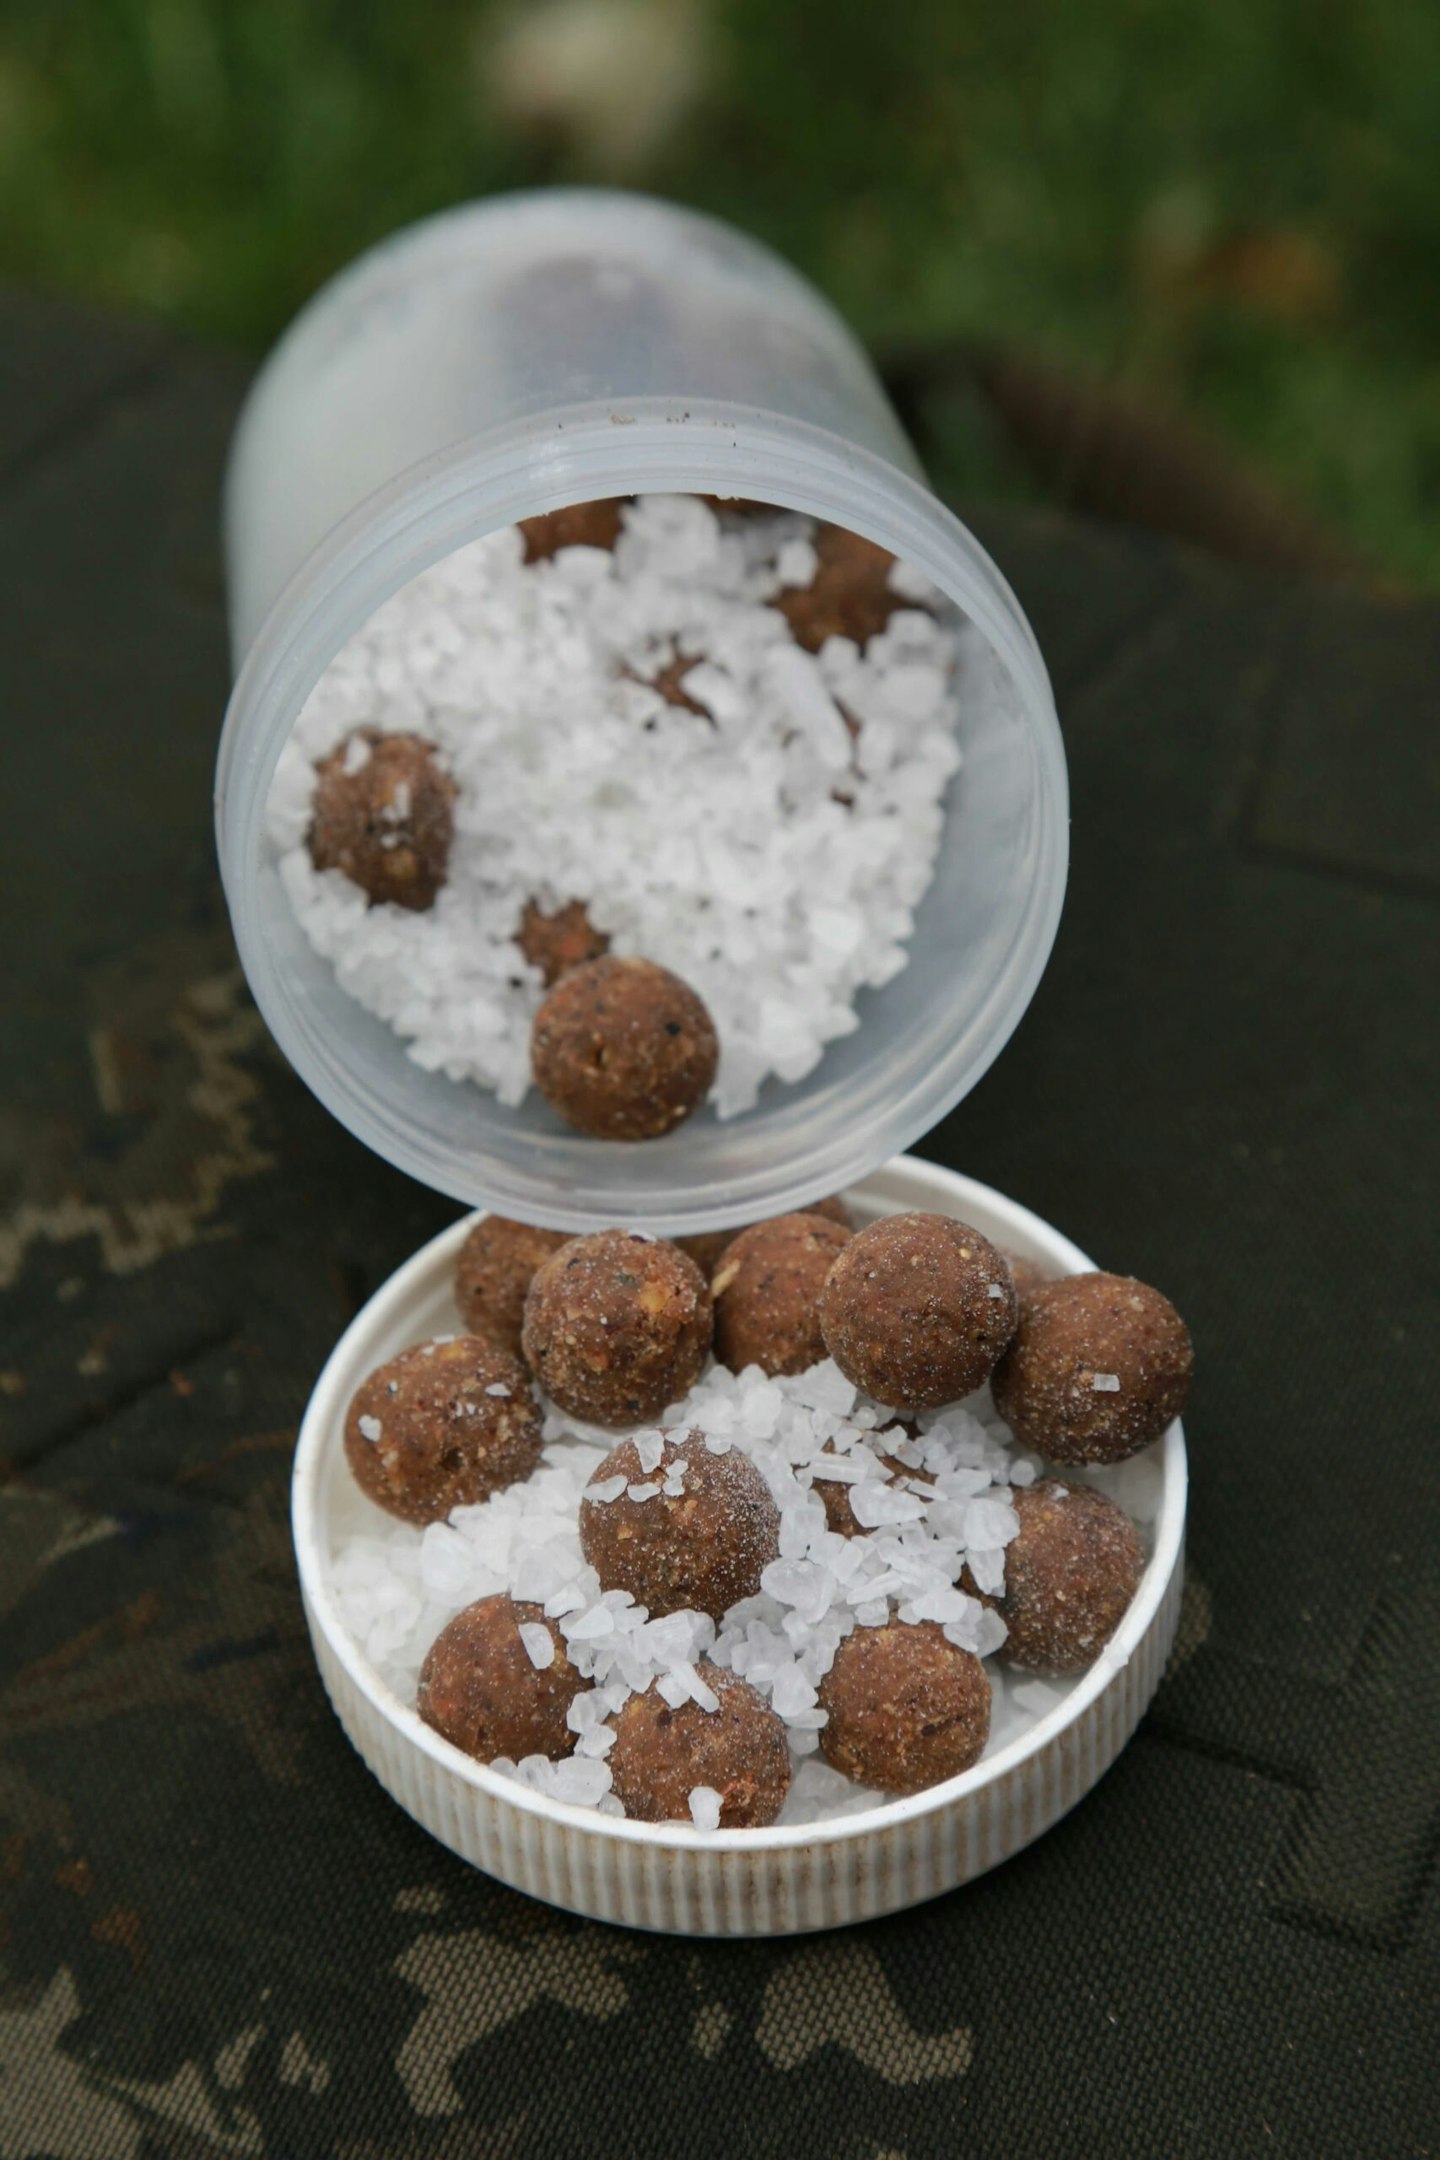 Salt can be a massive edge in your carp fishing when used correctly.